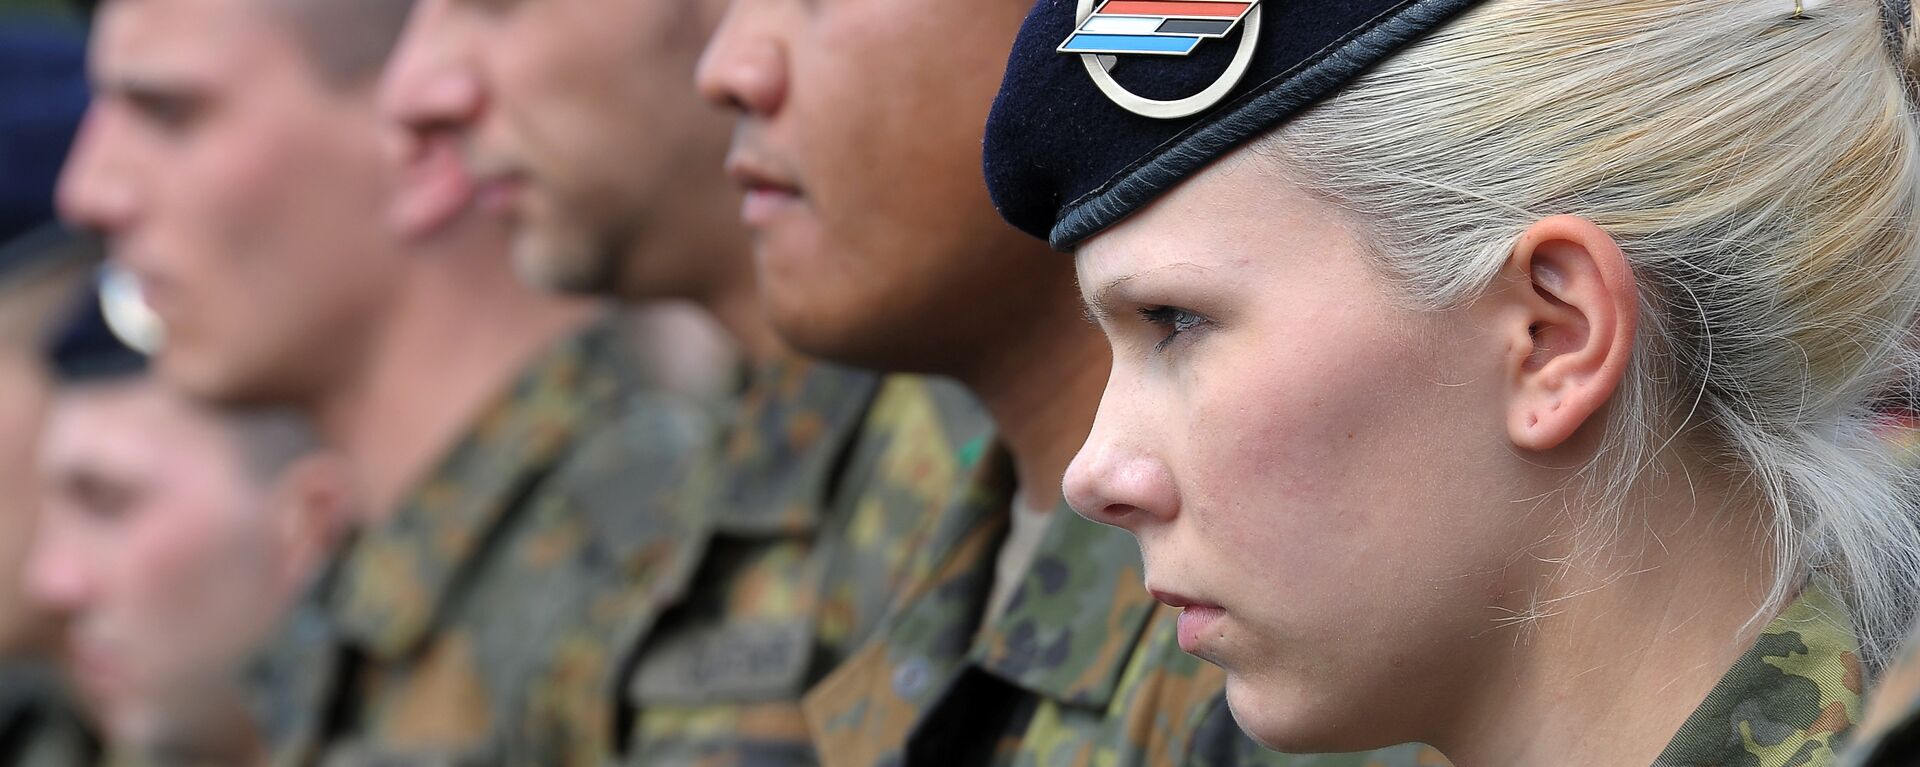 German soldiers of the 291st Jagerbataillon take part in a military ceremony on July 5, 2012 in Illkirch-Graffenstaden, eastern France. The 600 soldiers of the 291st Jägerbataillon, the first German regiment stationed in France since 1945 and who will parade down the Champs-Elysees avenue on July 14, represent a powerful symbol of reconciliation between the two countries - Sputnik Mundo, 1920, 09.09.2021